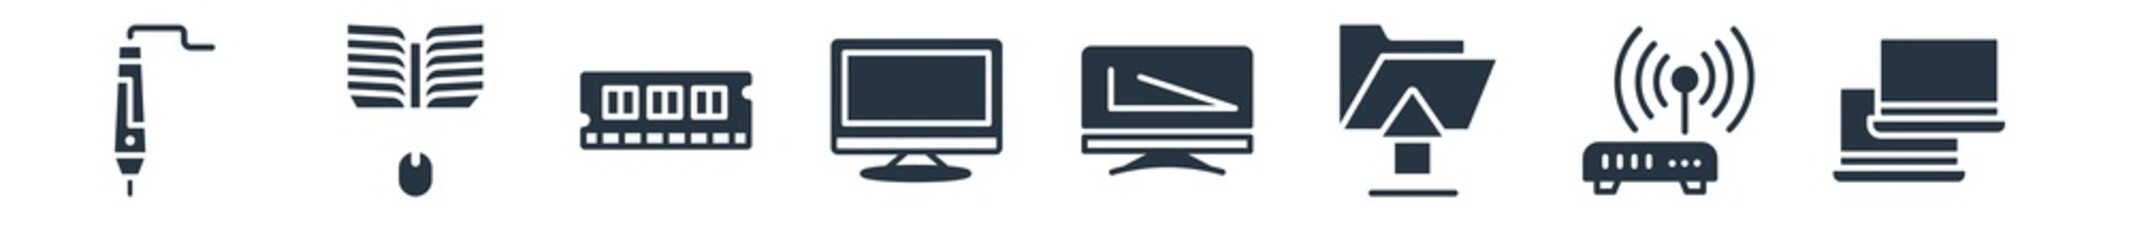 computer filled icons. glyph vector icons such as computers, wireless internet connection, save file, pc with monitor, monitor screen, random access memory chip, book and computer mouse sign